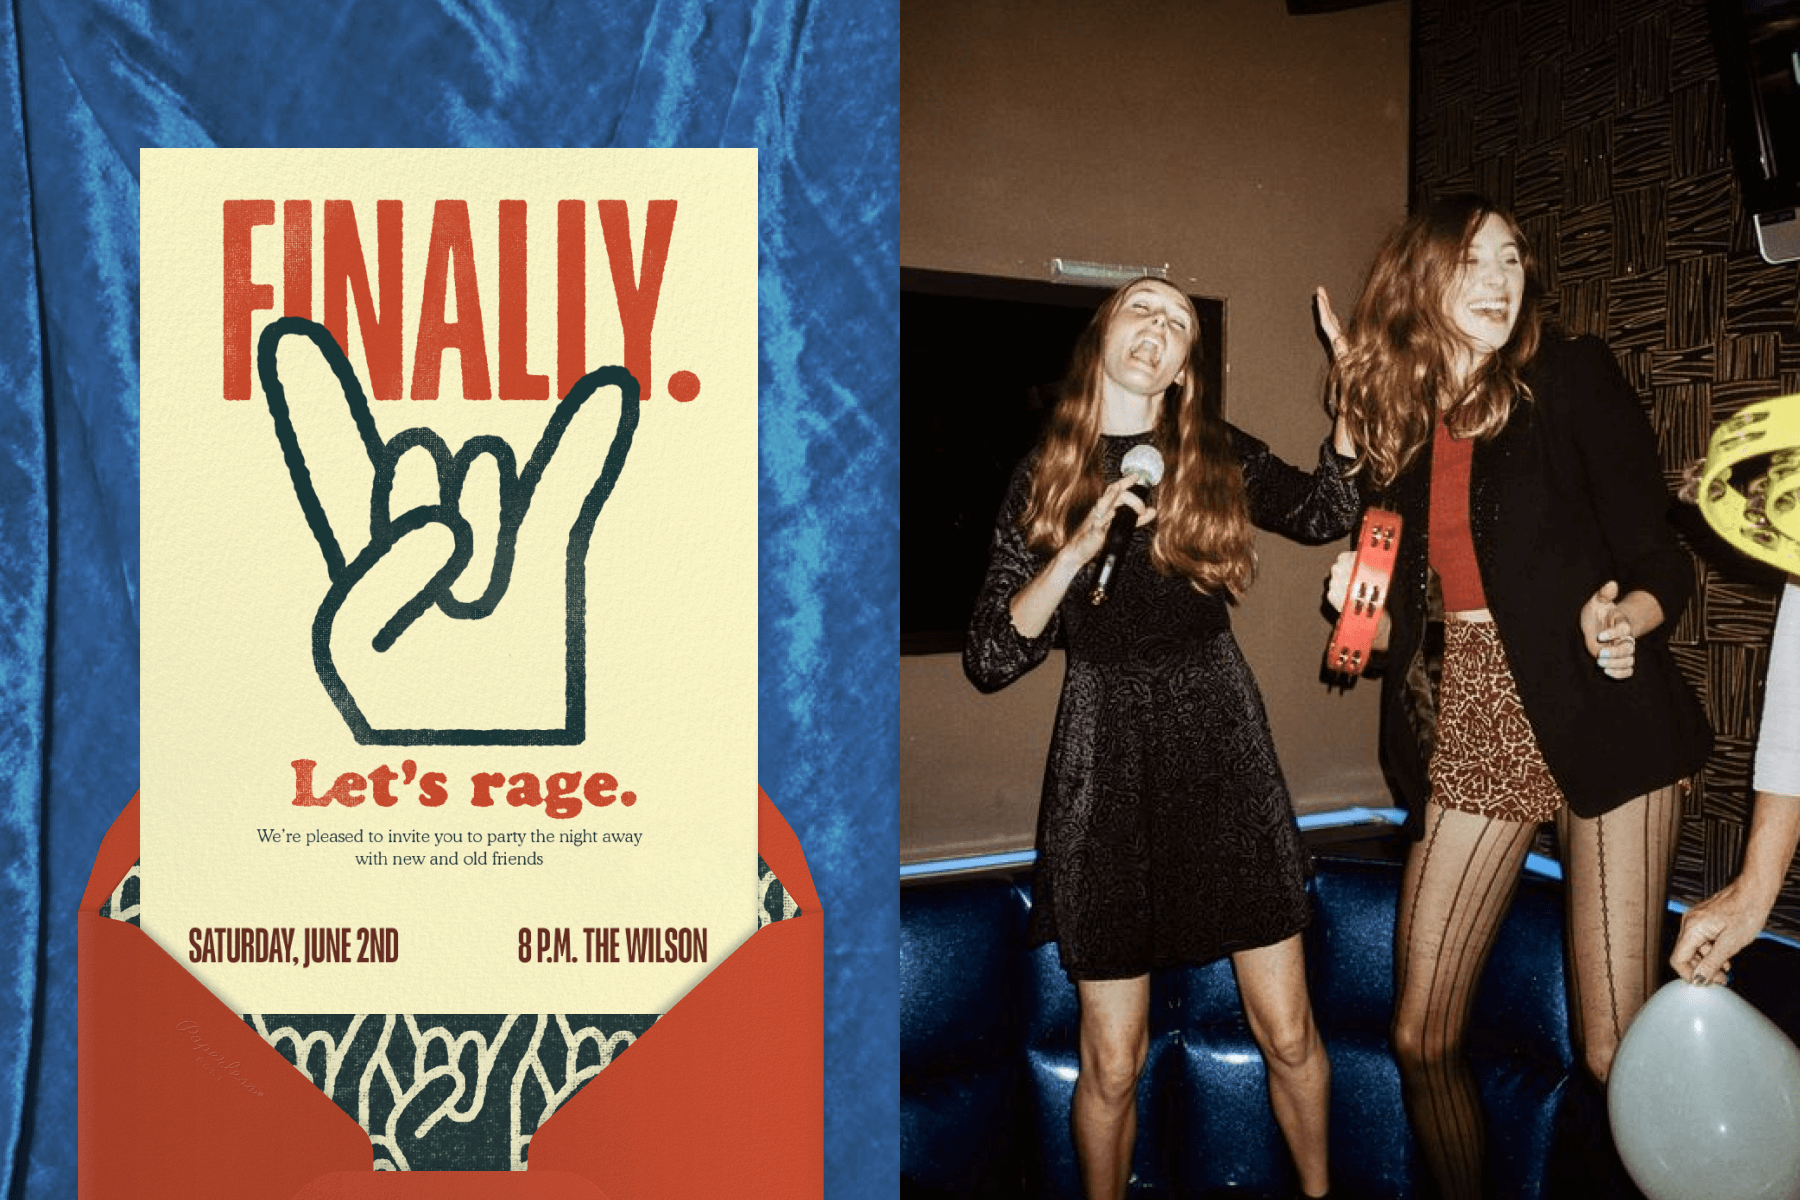 Left: Party invitation that reads, "finally, let's rage," on an off-white background with a red envelope featuring a black liner. Right: Two girls singing karaoke while standing on a blue couch. 